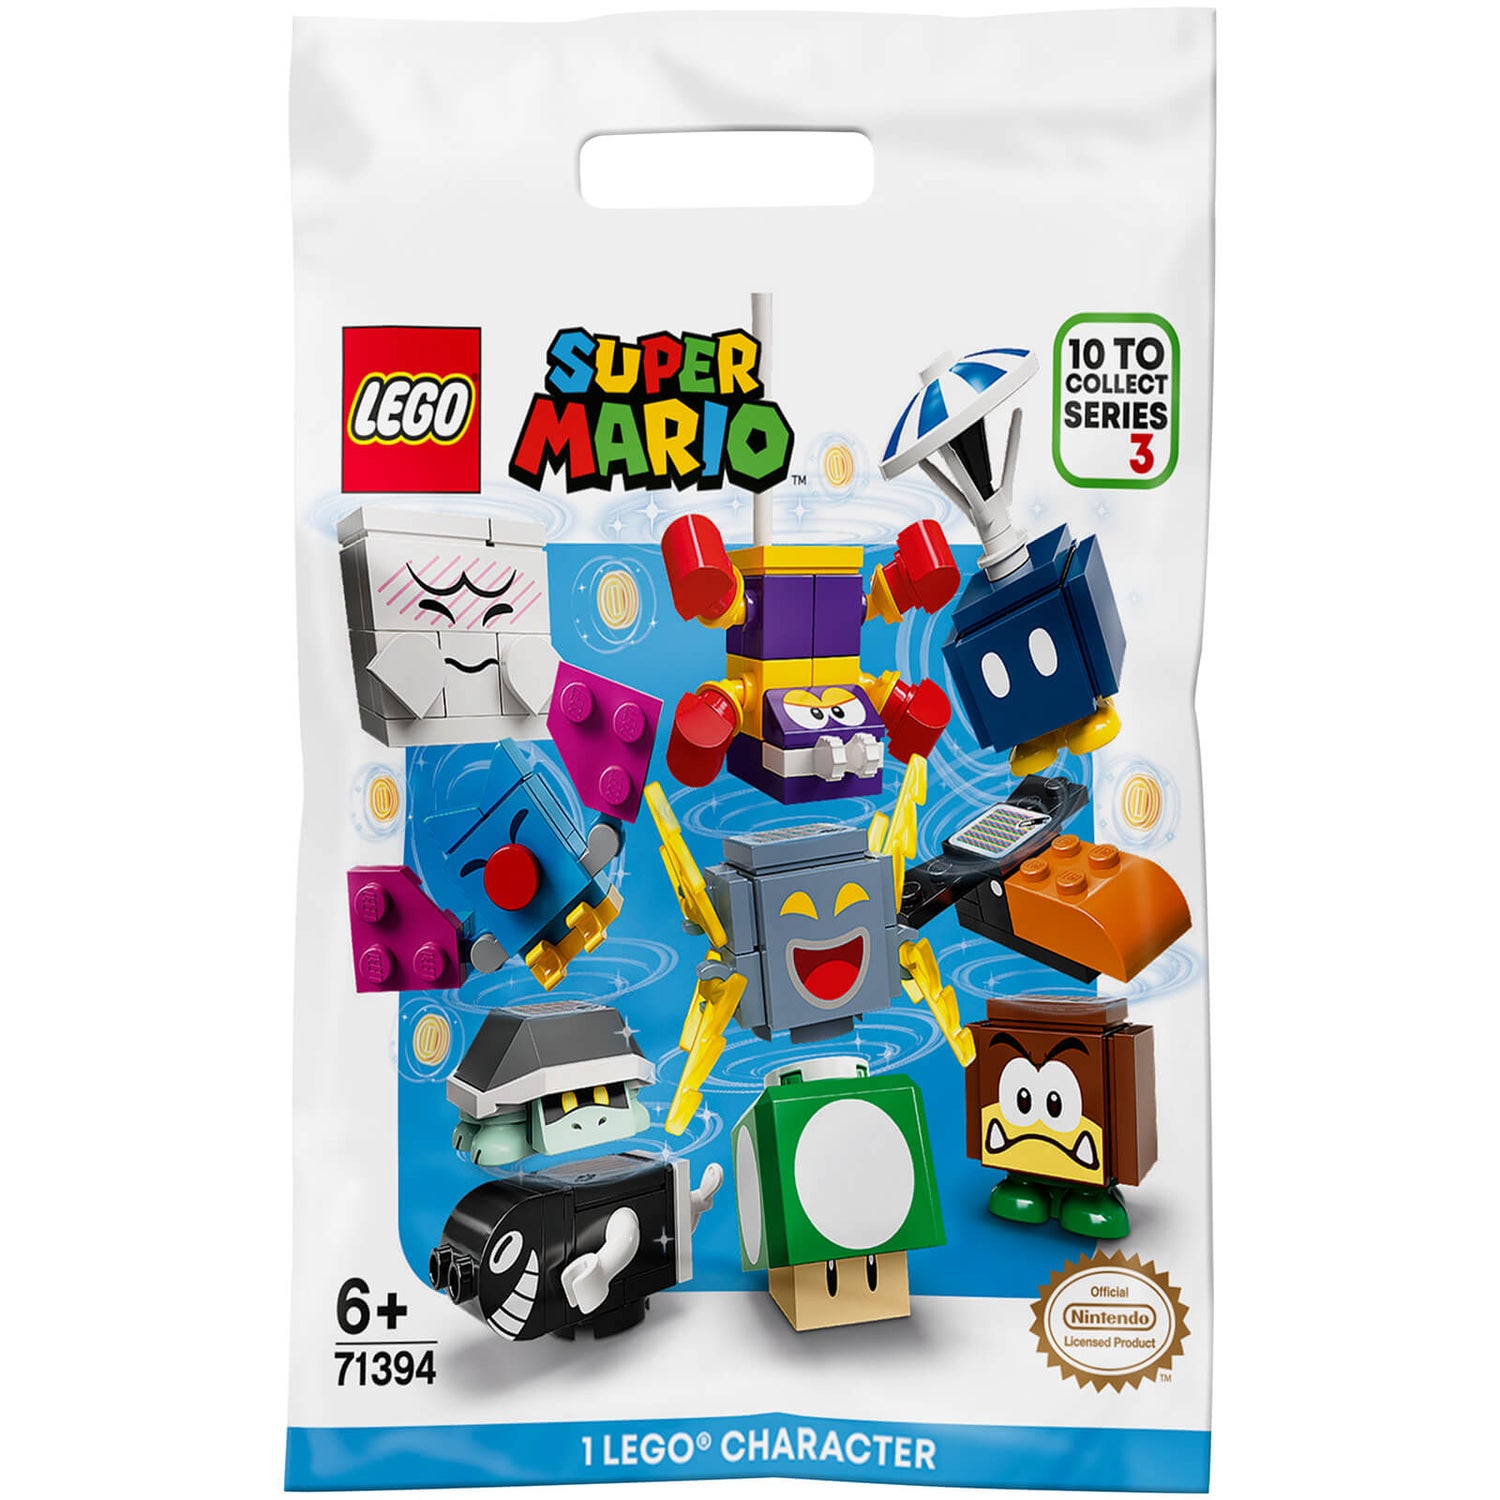 LEGO Super Mario Character Packs Series 3 Collectible Toy (71394)